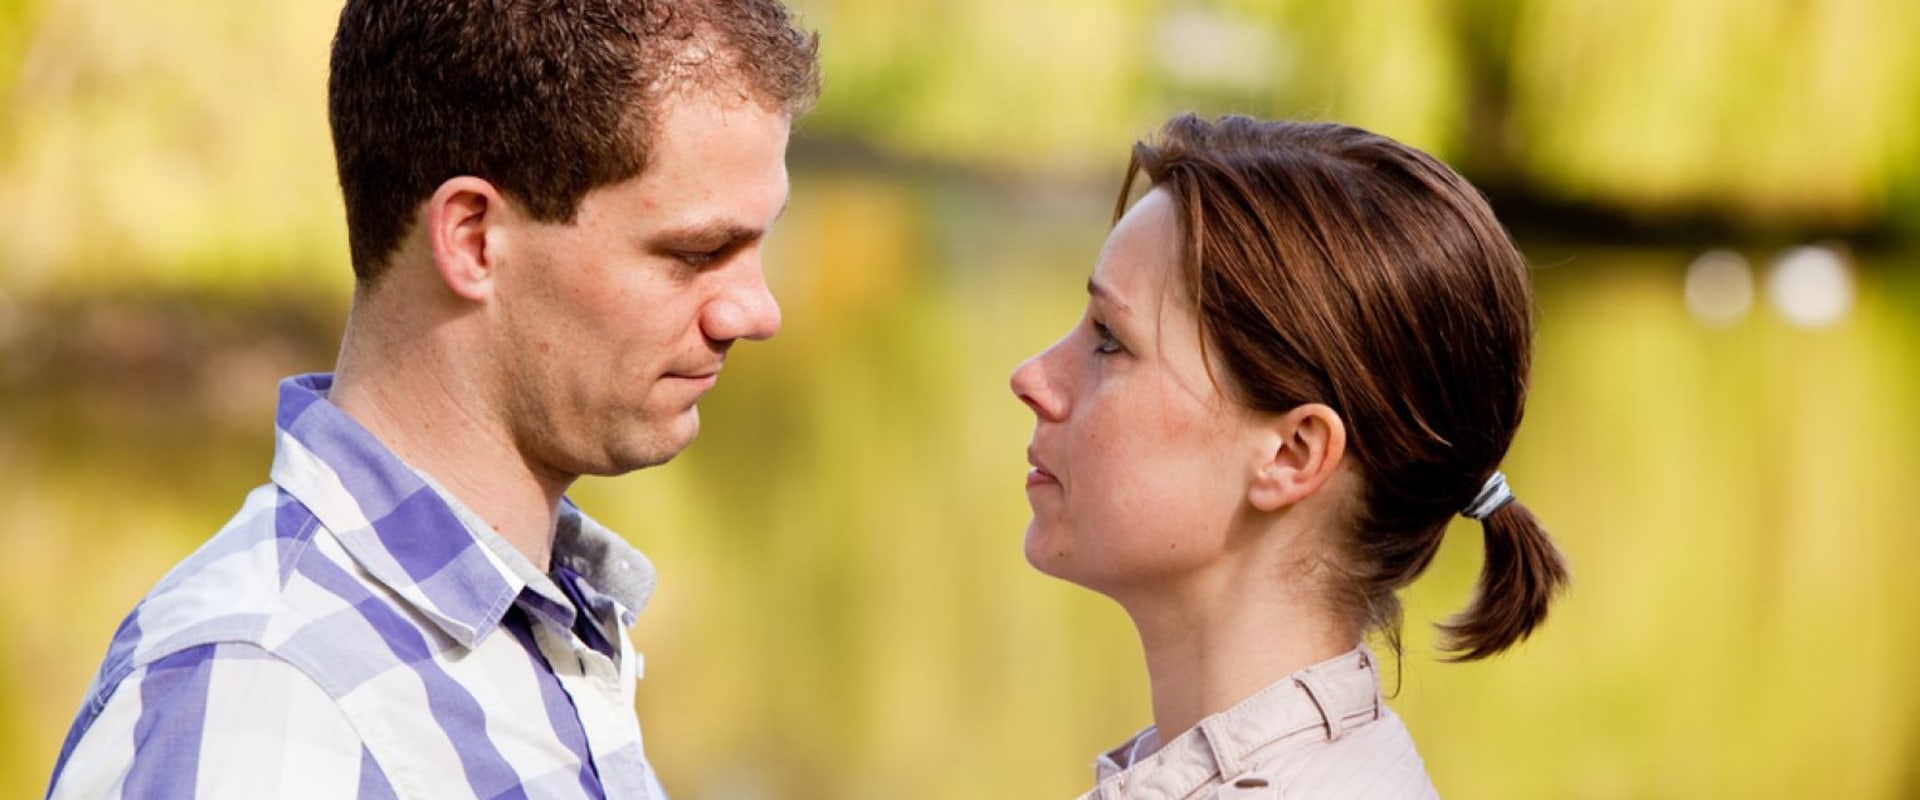 Resolving Difficult Conversations in Relationships